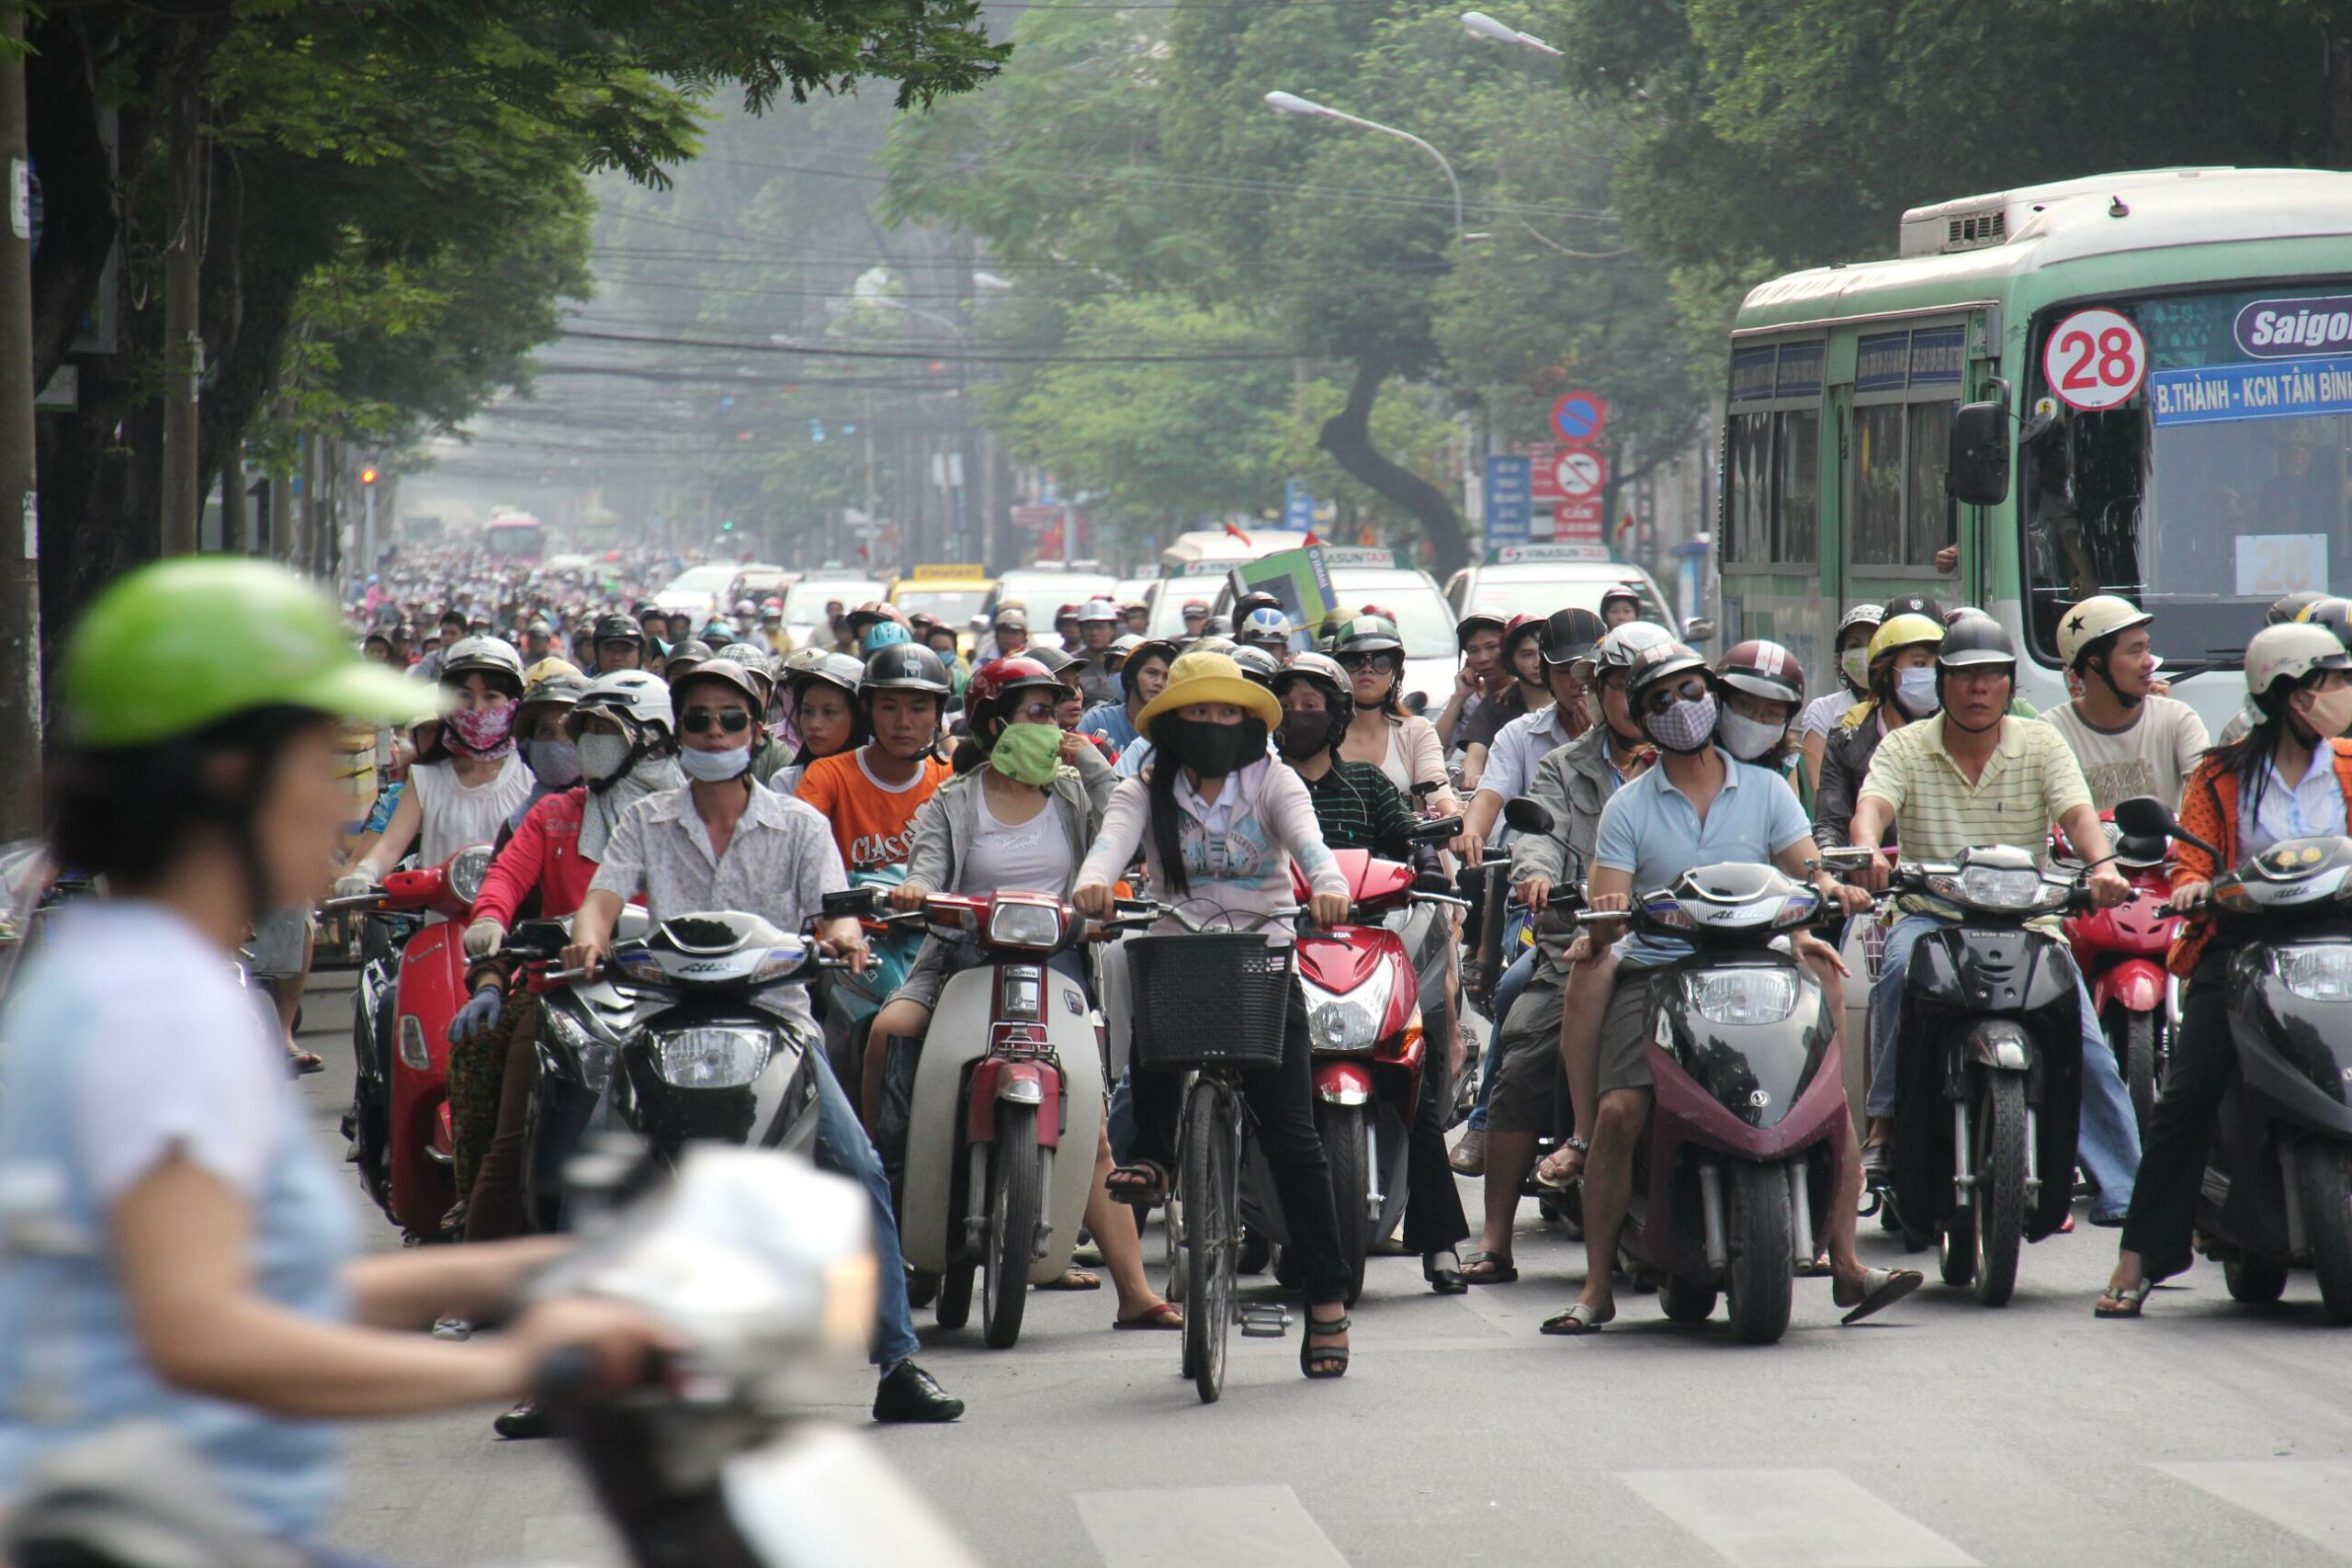 The "economic miracle" of capitalism has deeply infiltrated Ho Chi Minh City, Vietnam, where most own a motorized scooter.